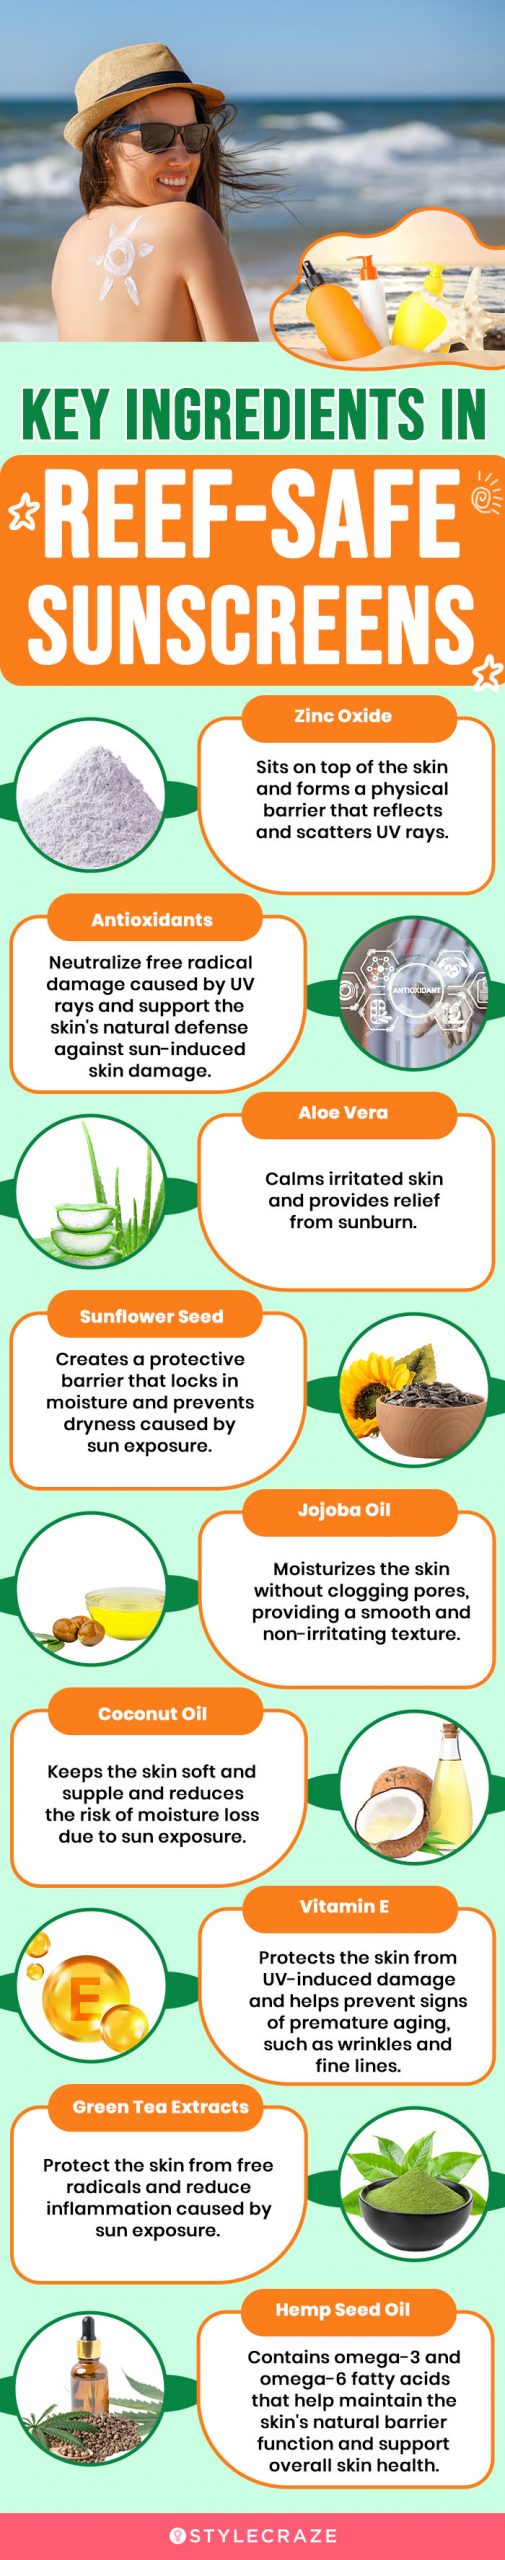 Key Ingredients In Reef-Safe Sunscreens (infographic)